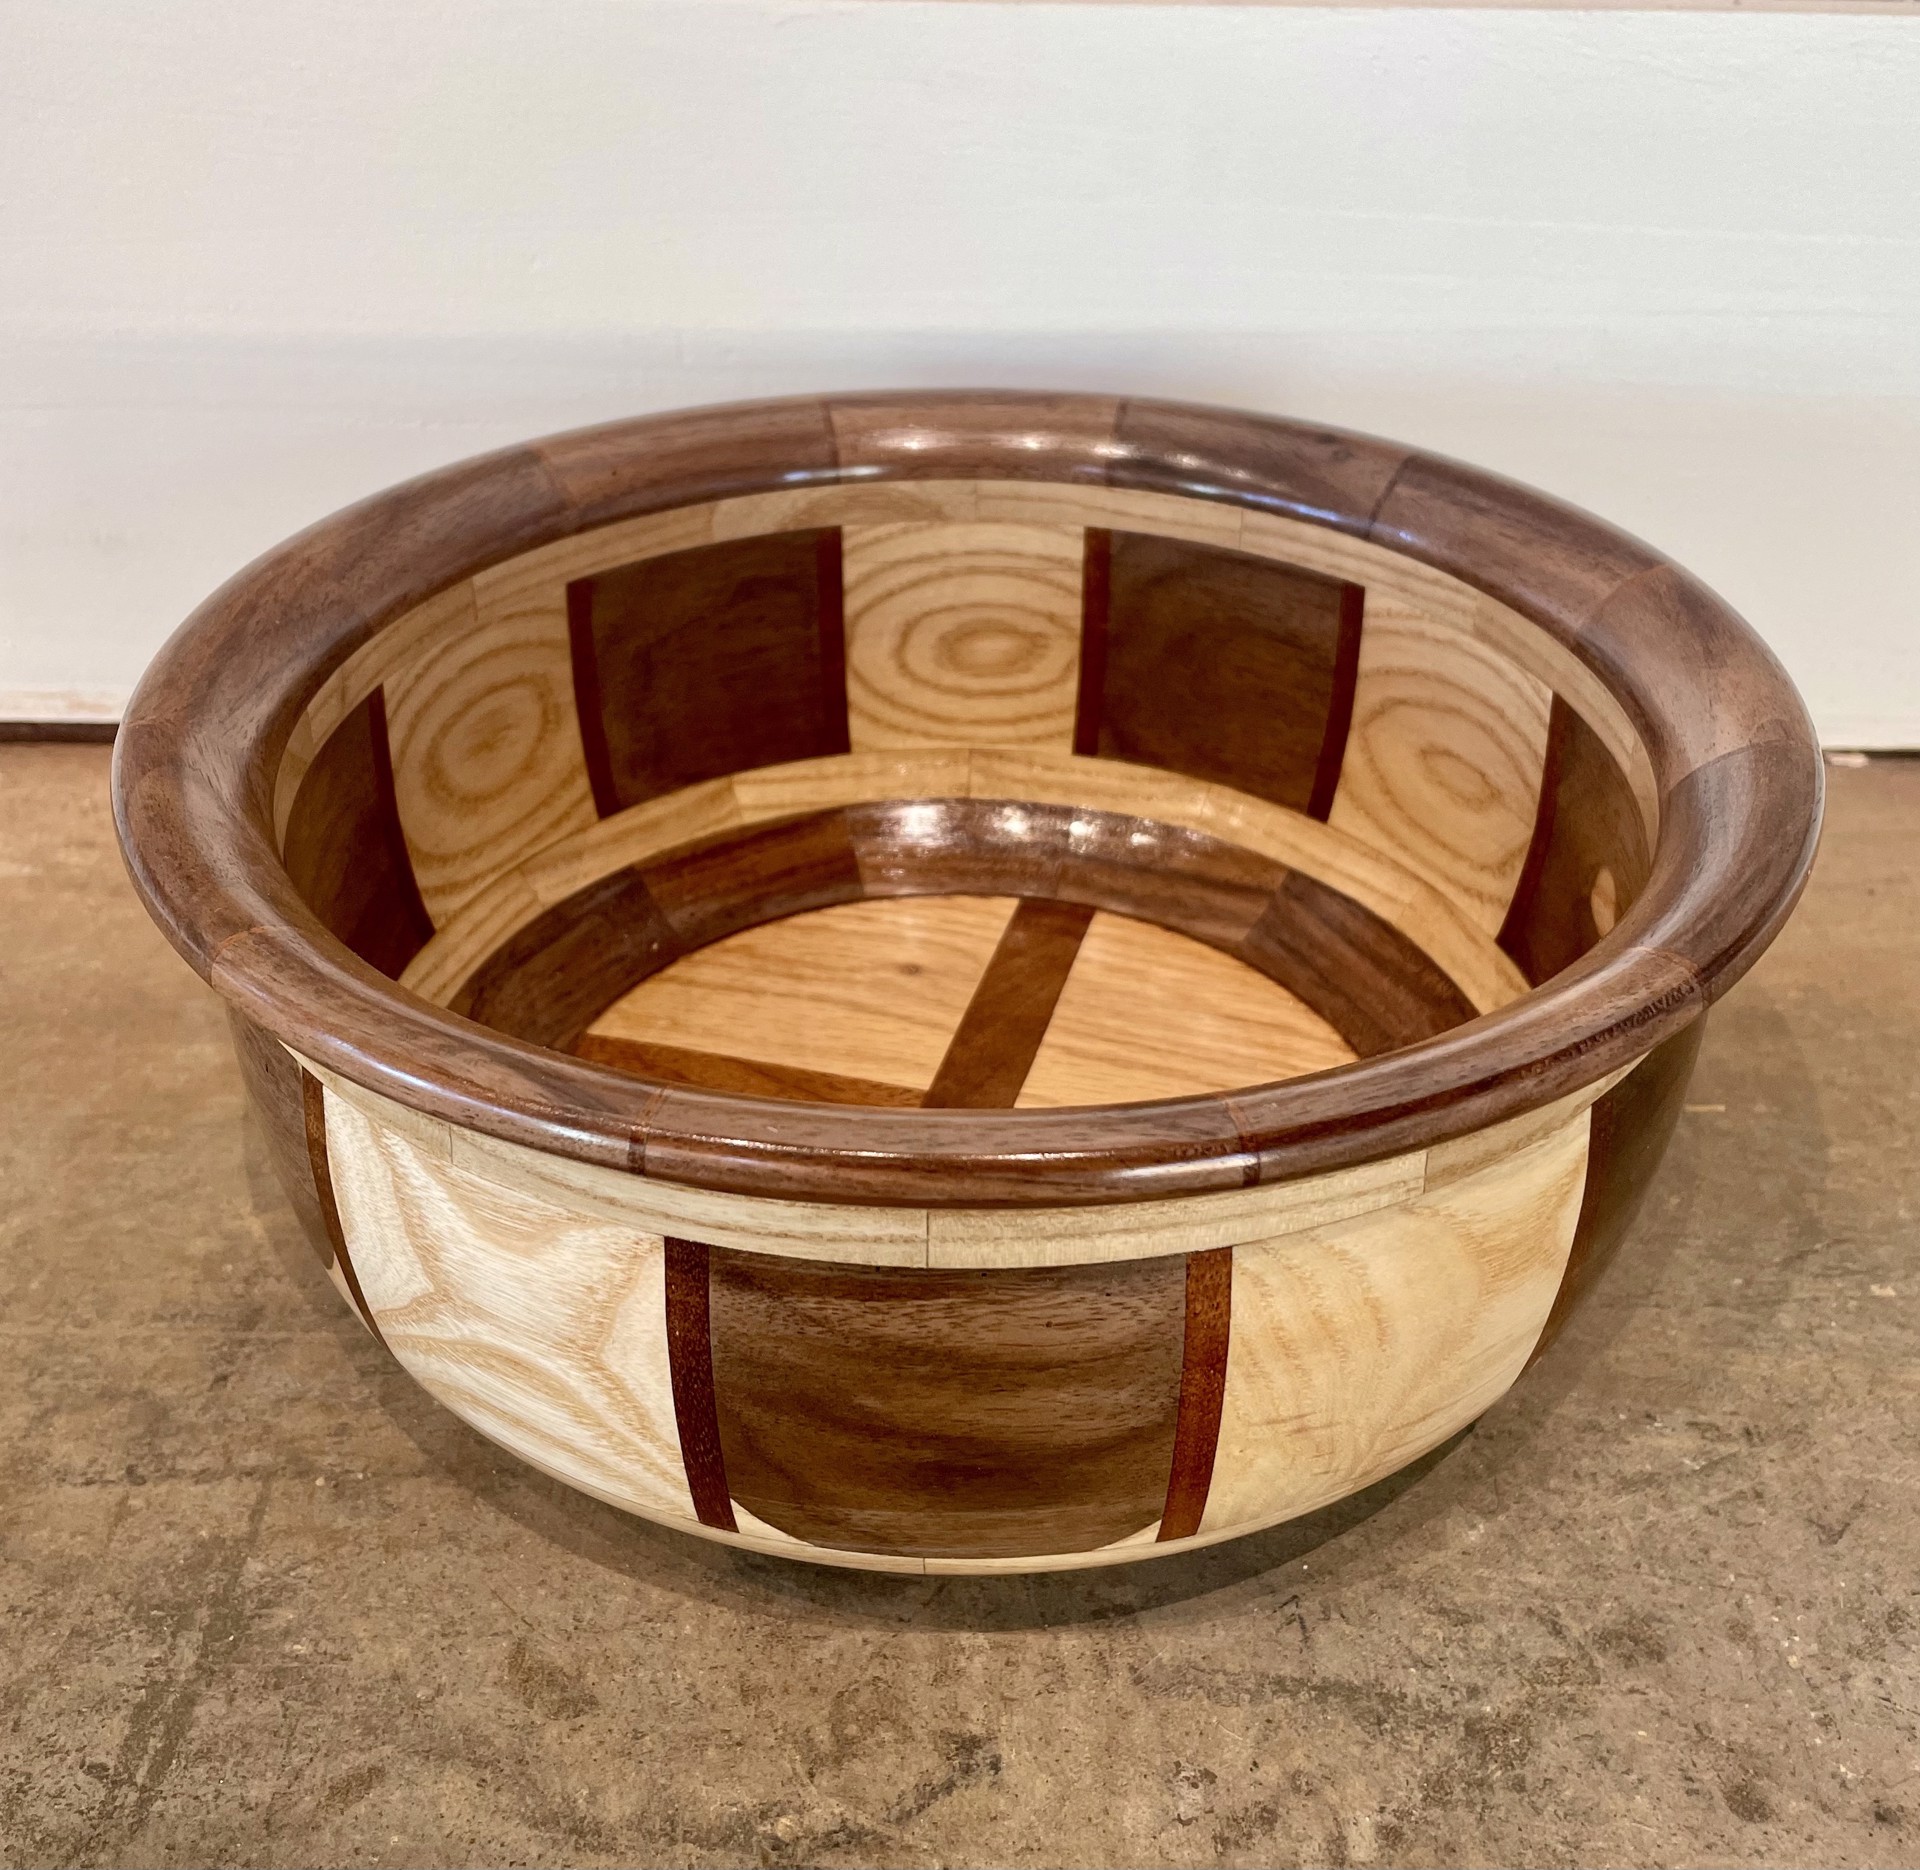 Hand Carved Bowl 7 by William Dunaway